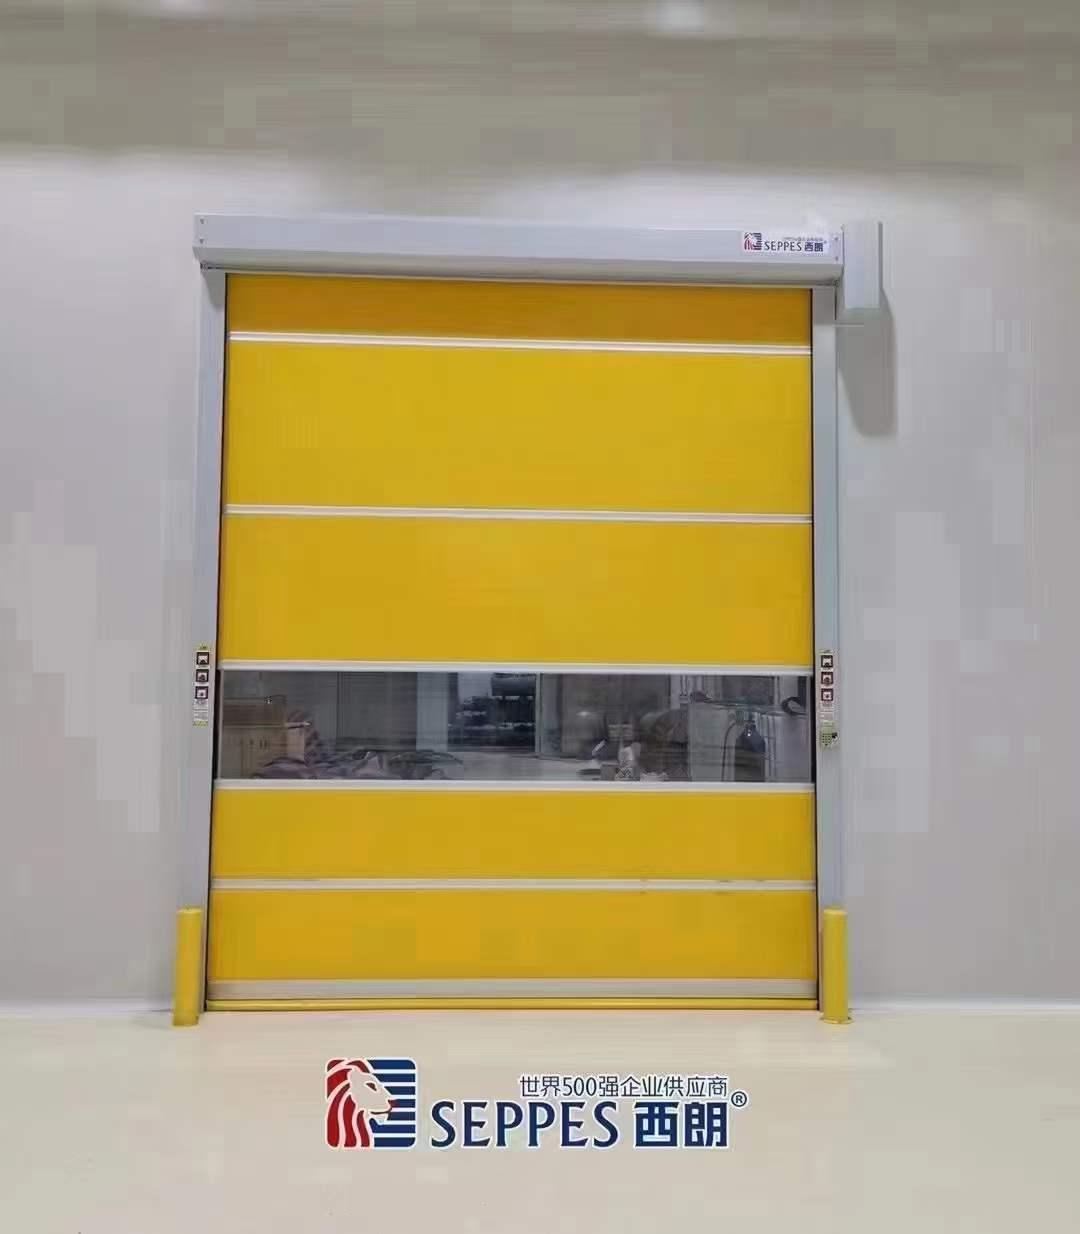 The role of installing high speed door in pharmaceutical factories